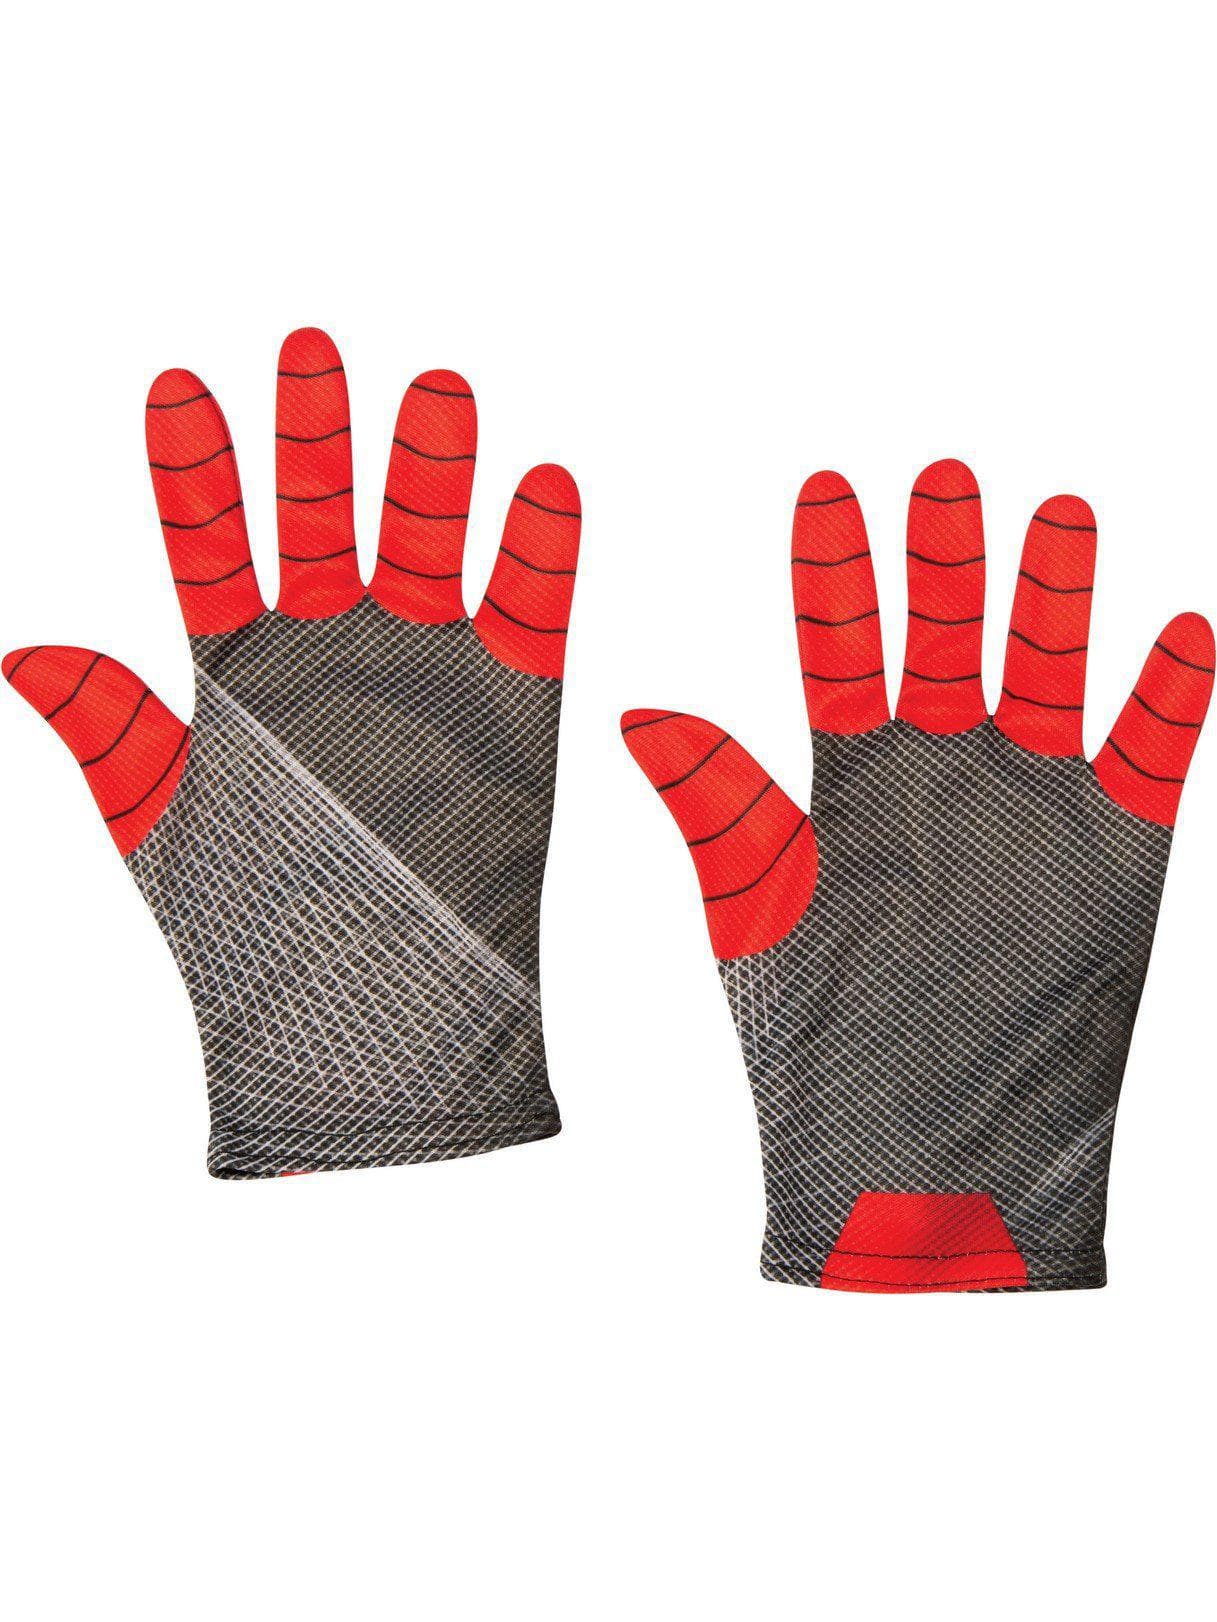 Boys' Spider-Man: Far From Home Spider-Man Gloves - costumes.com